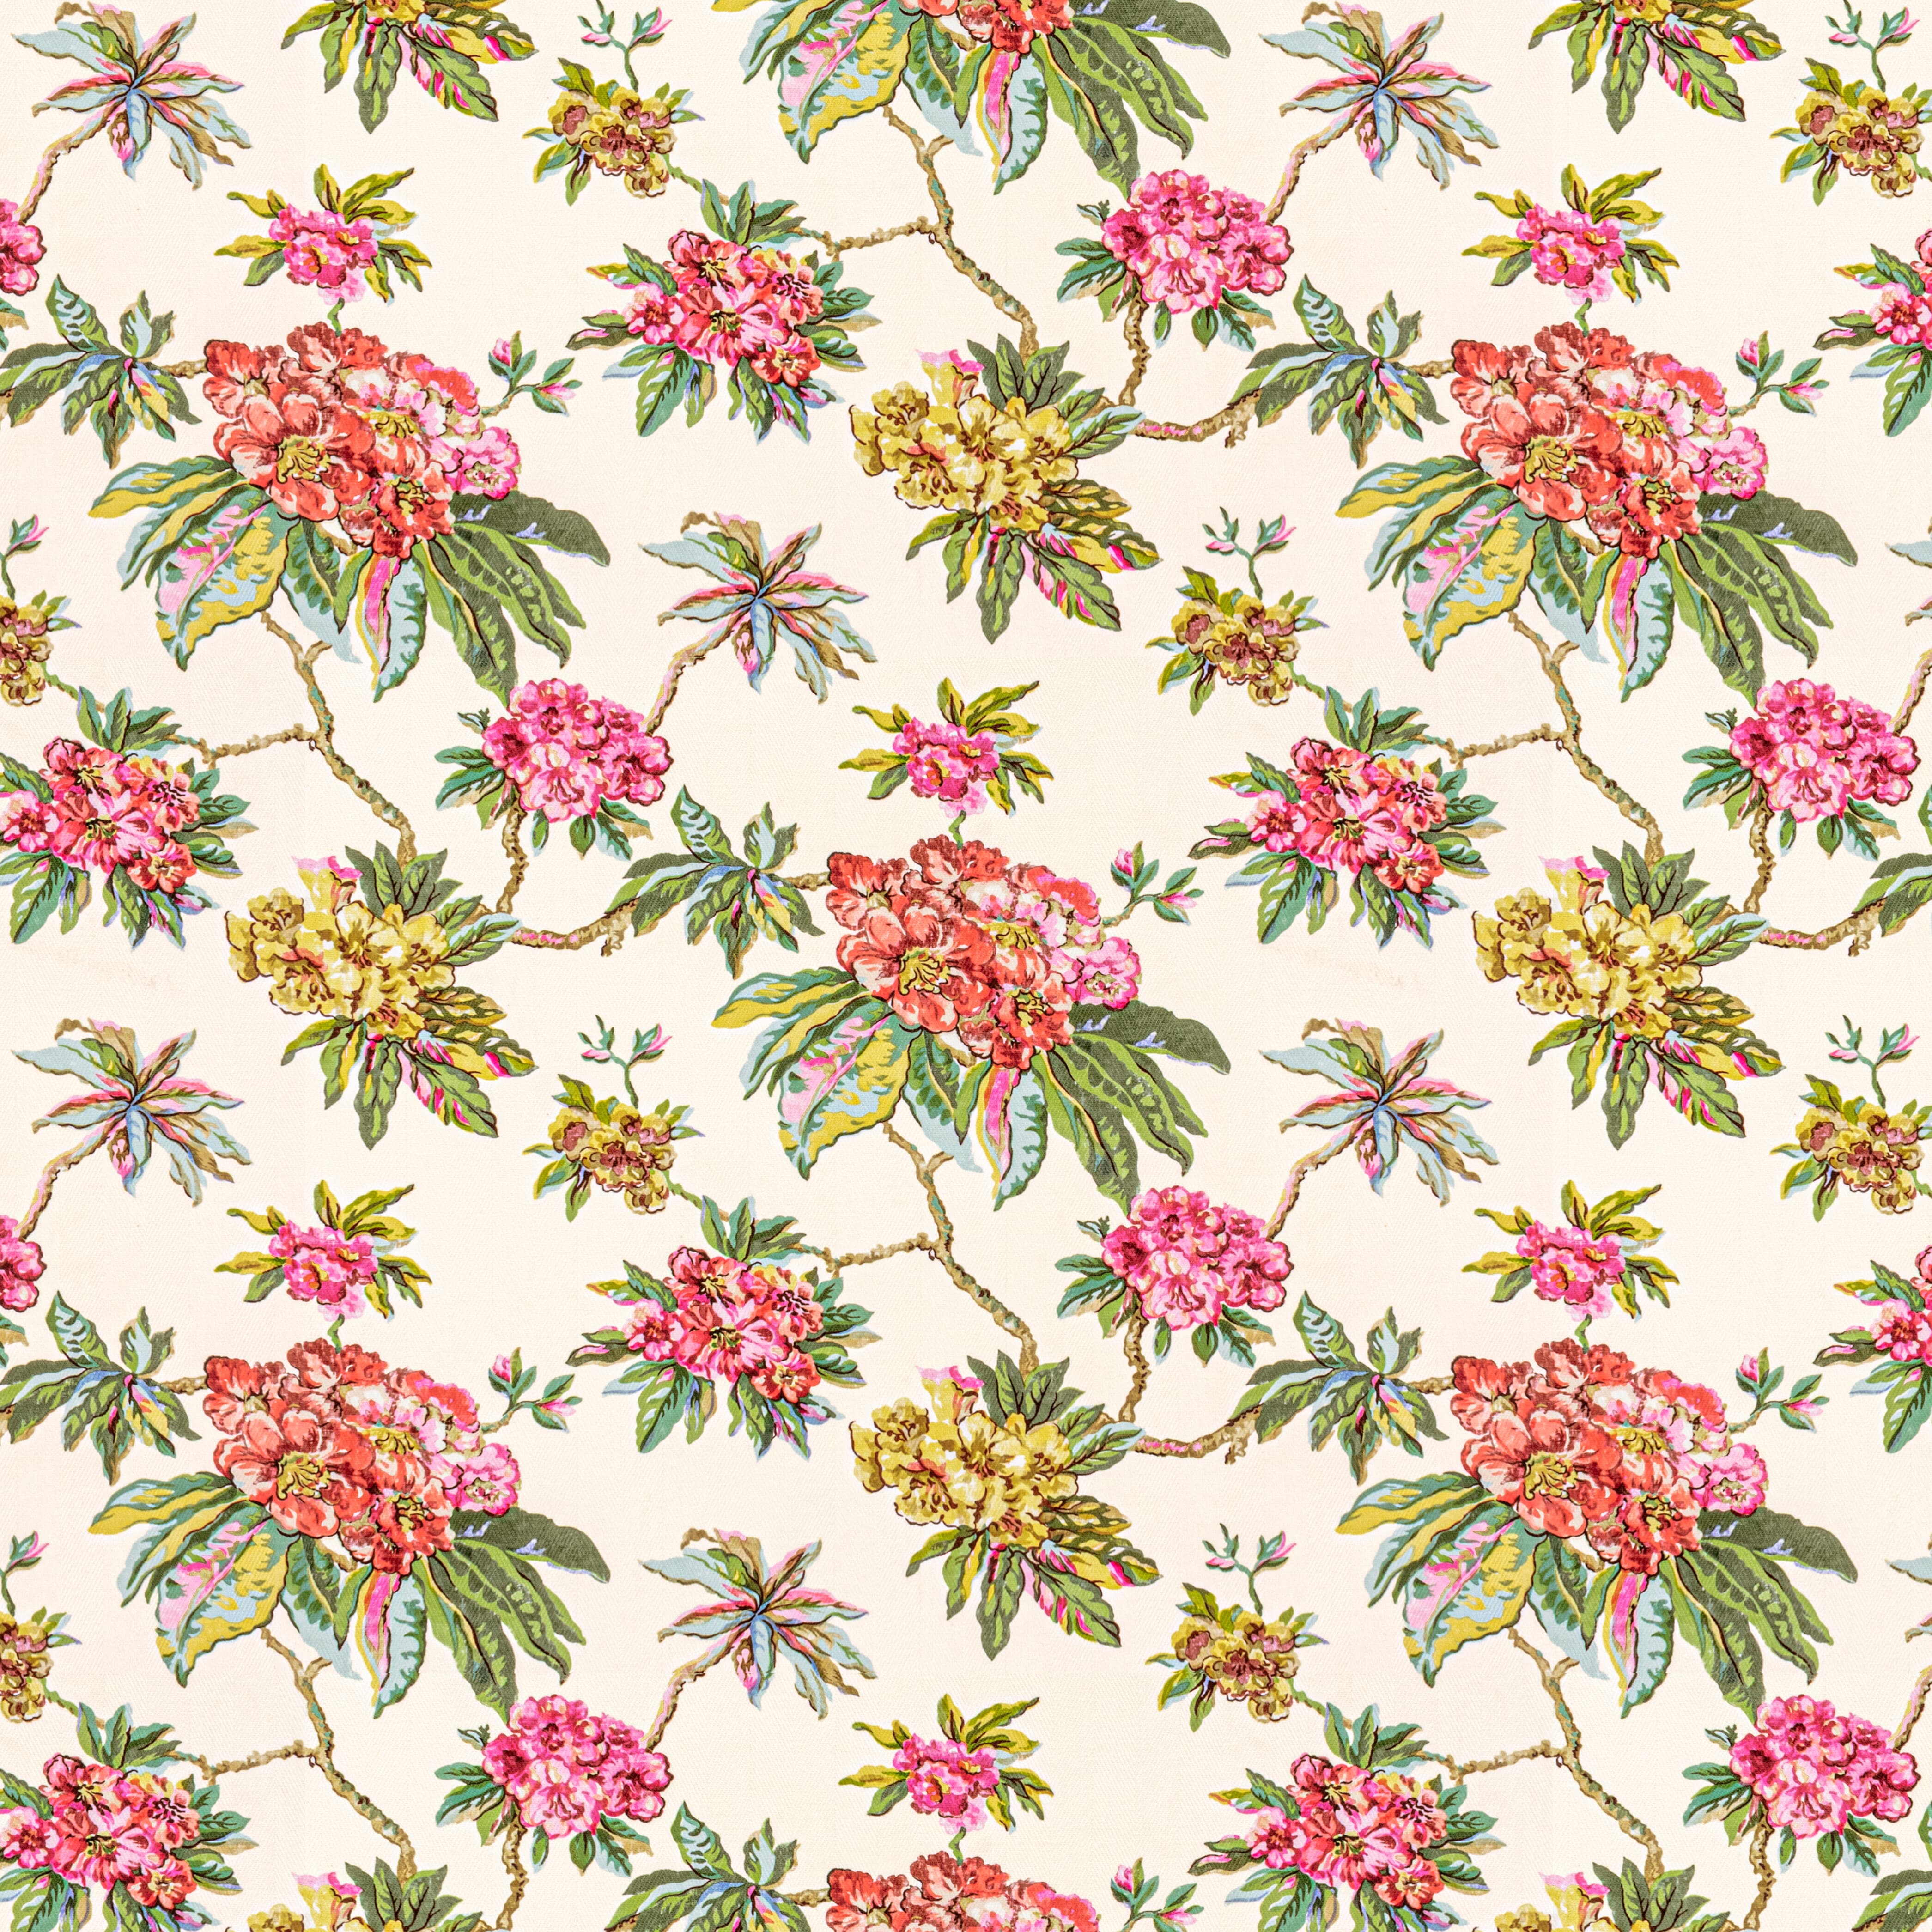 7811-21 Wilton Reef by Stout Fabric